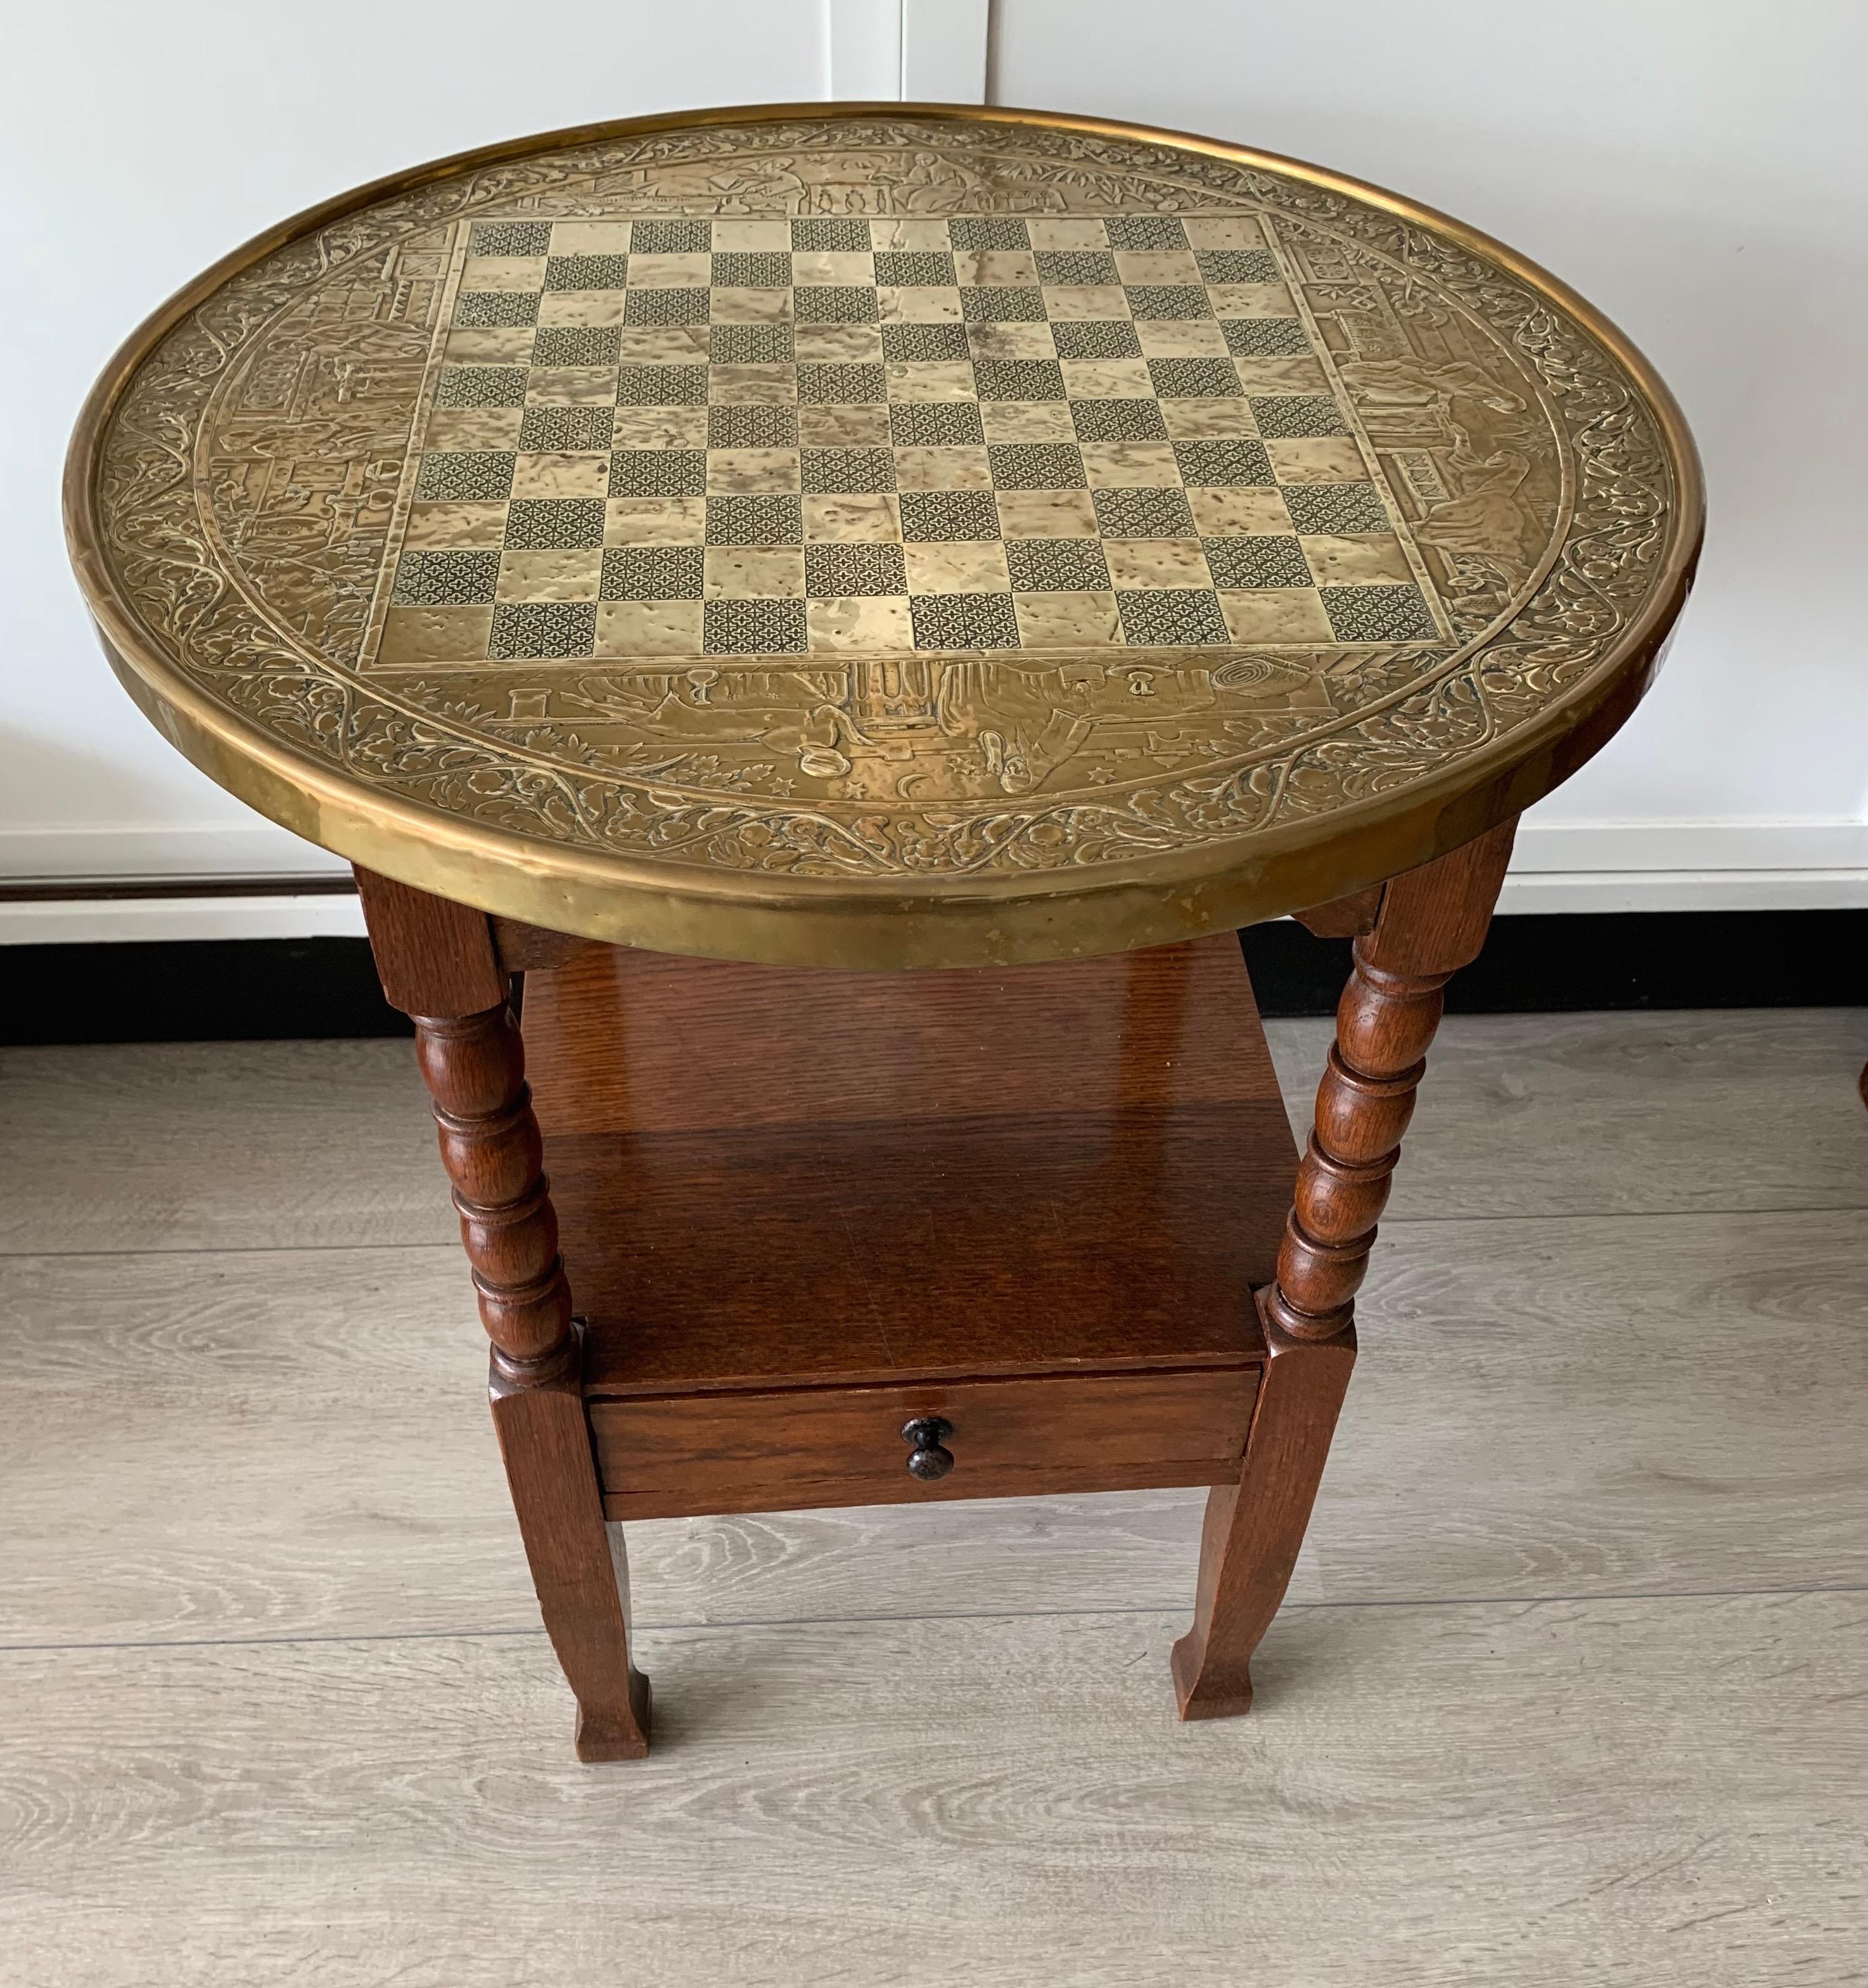 Early 1900s Dutch Arts & Crafts Checkers/Draughts Table with Embossed Brass Top 8